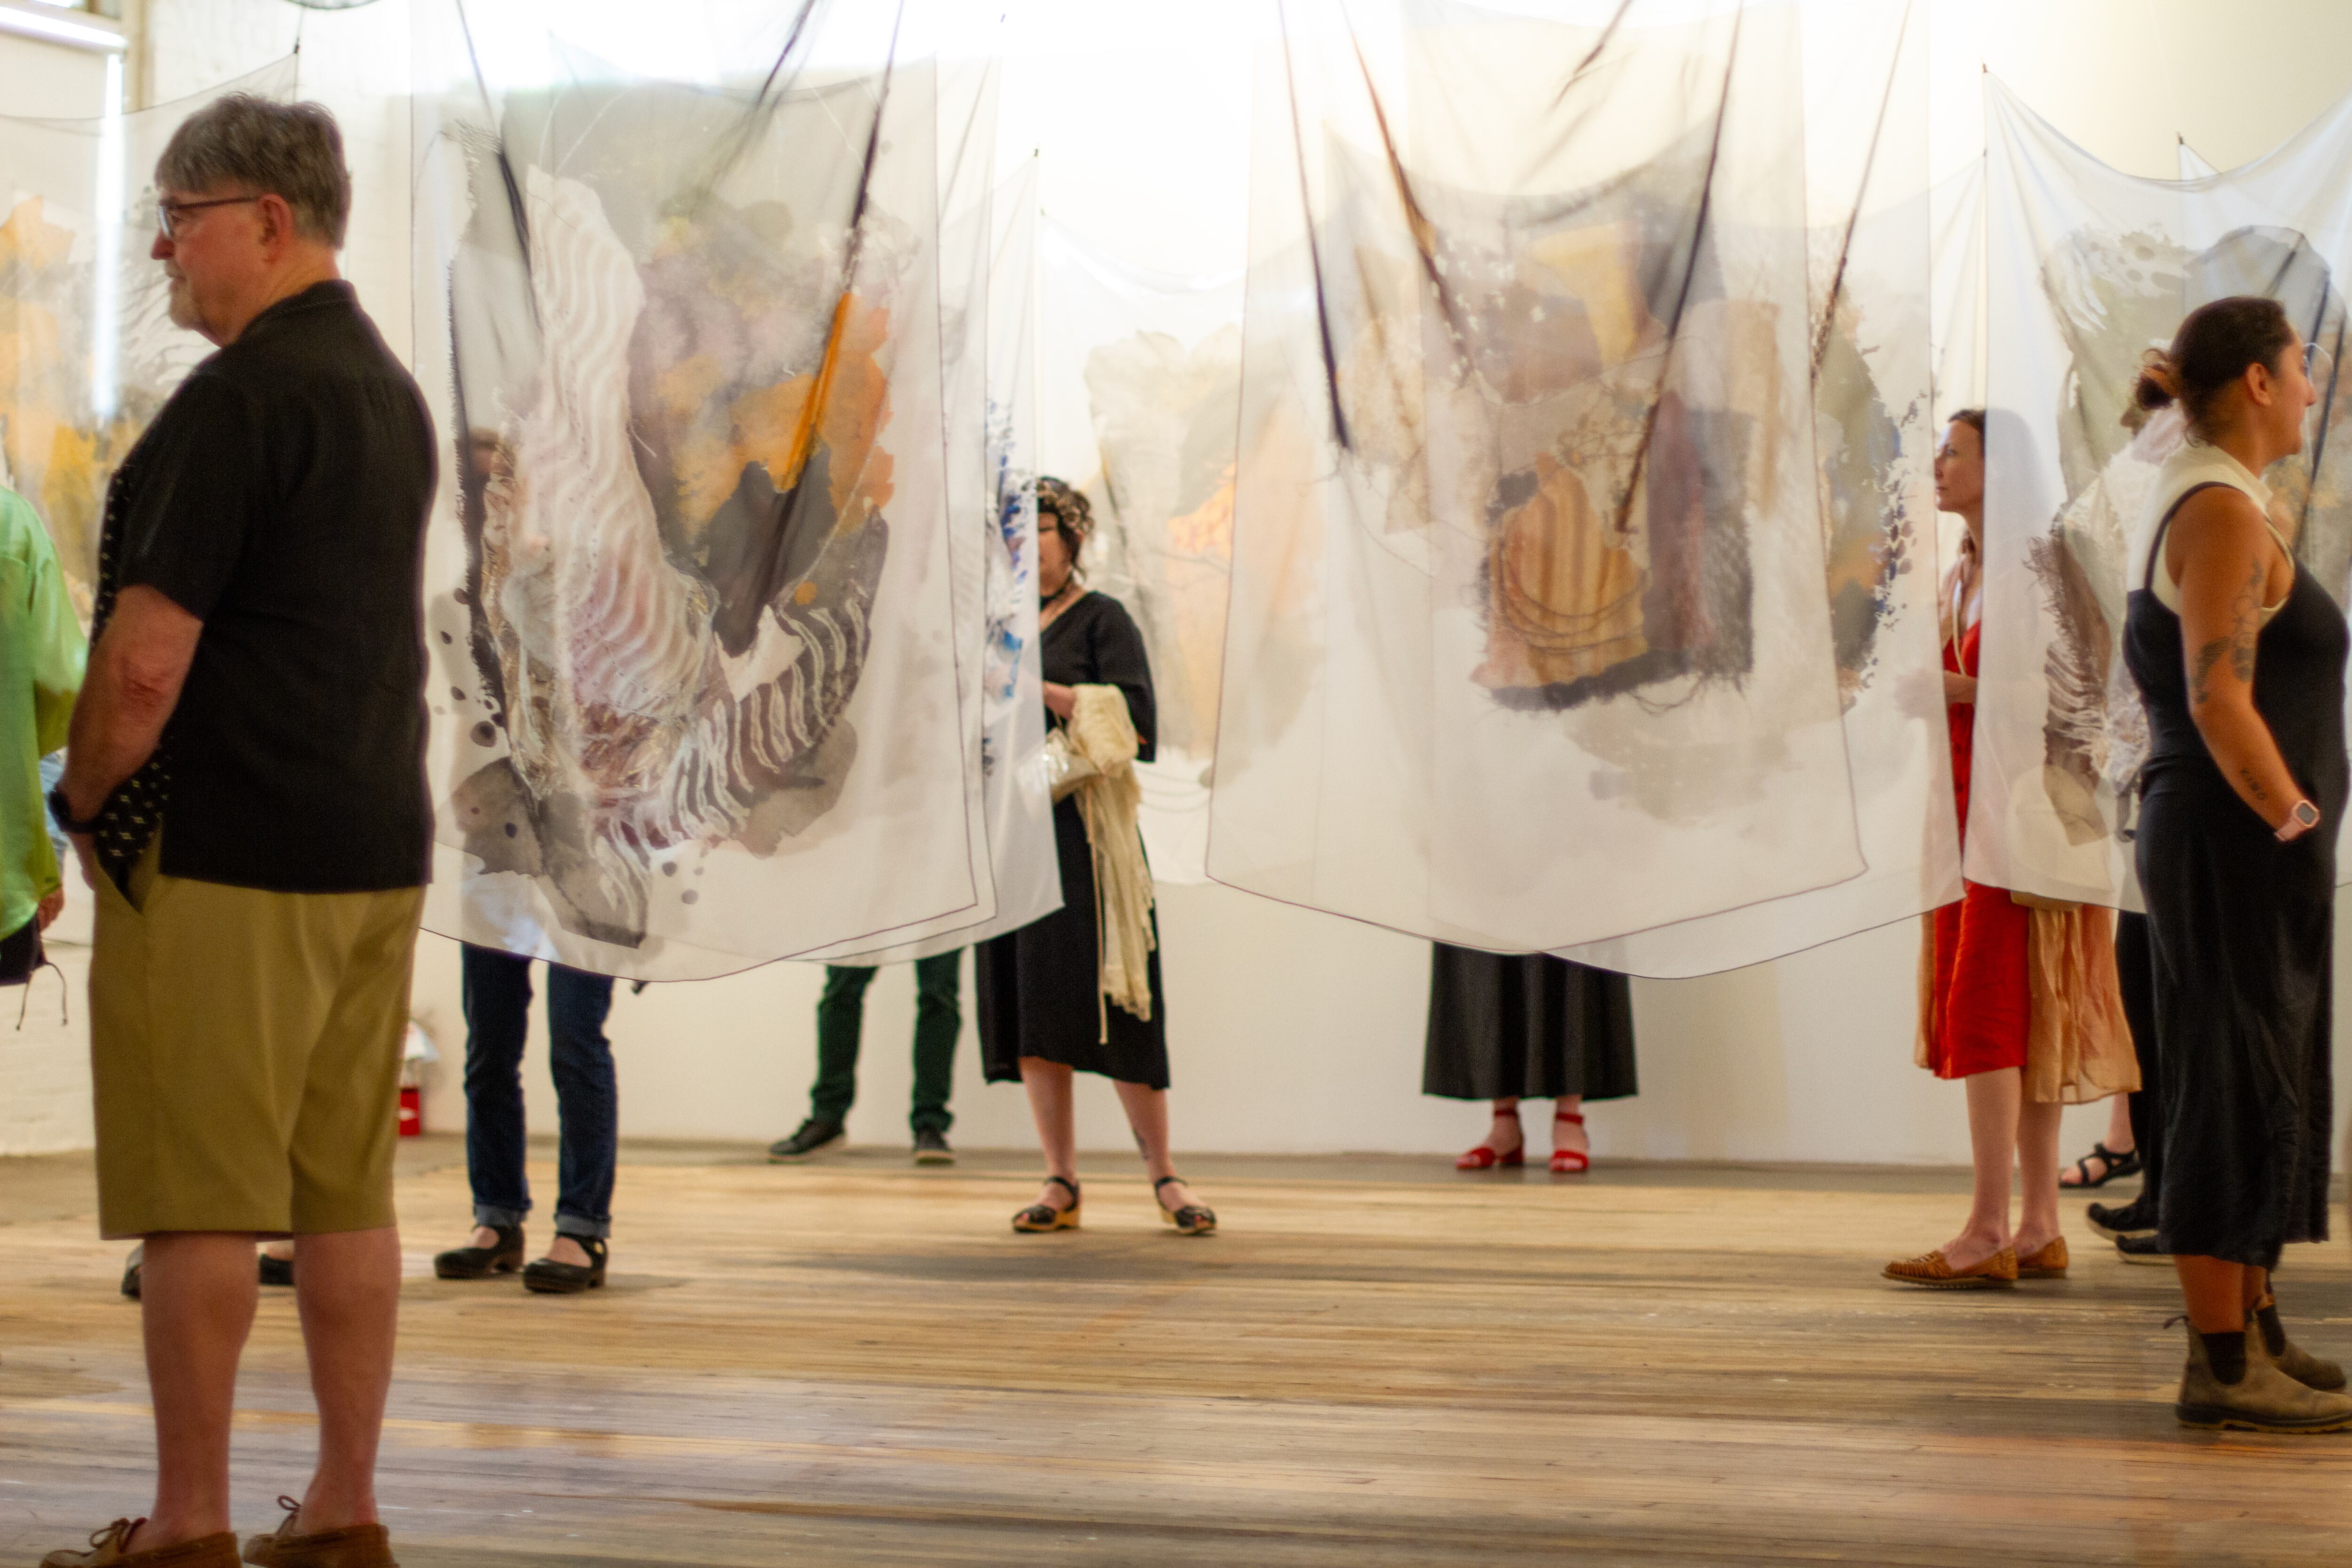 Attendees interact with more than a dozen art pieces printed on silk chiffon fabrics that hang from the ceiling of the Center for Native Arts & Cultures building during the grand opening of the 